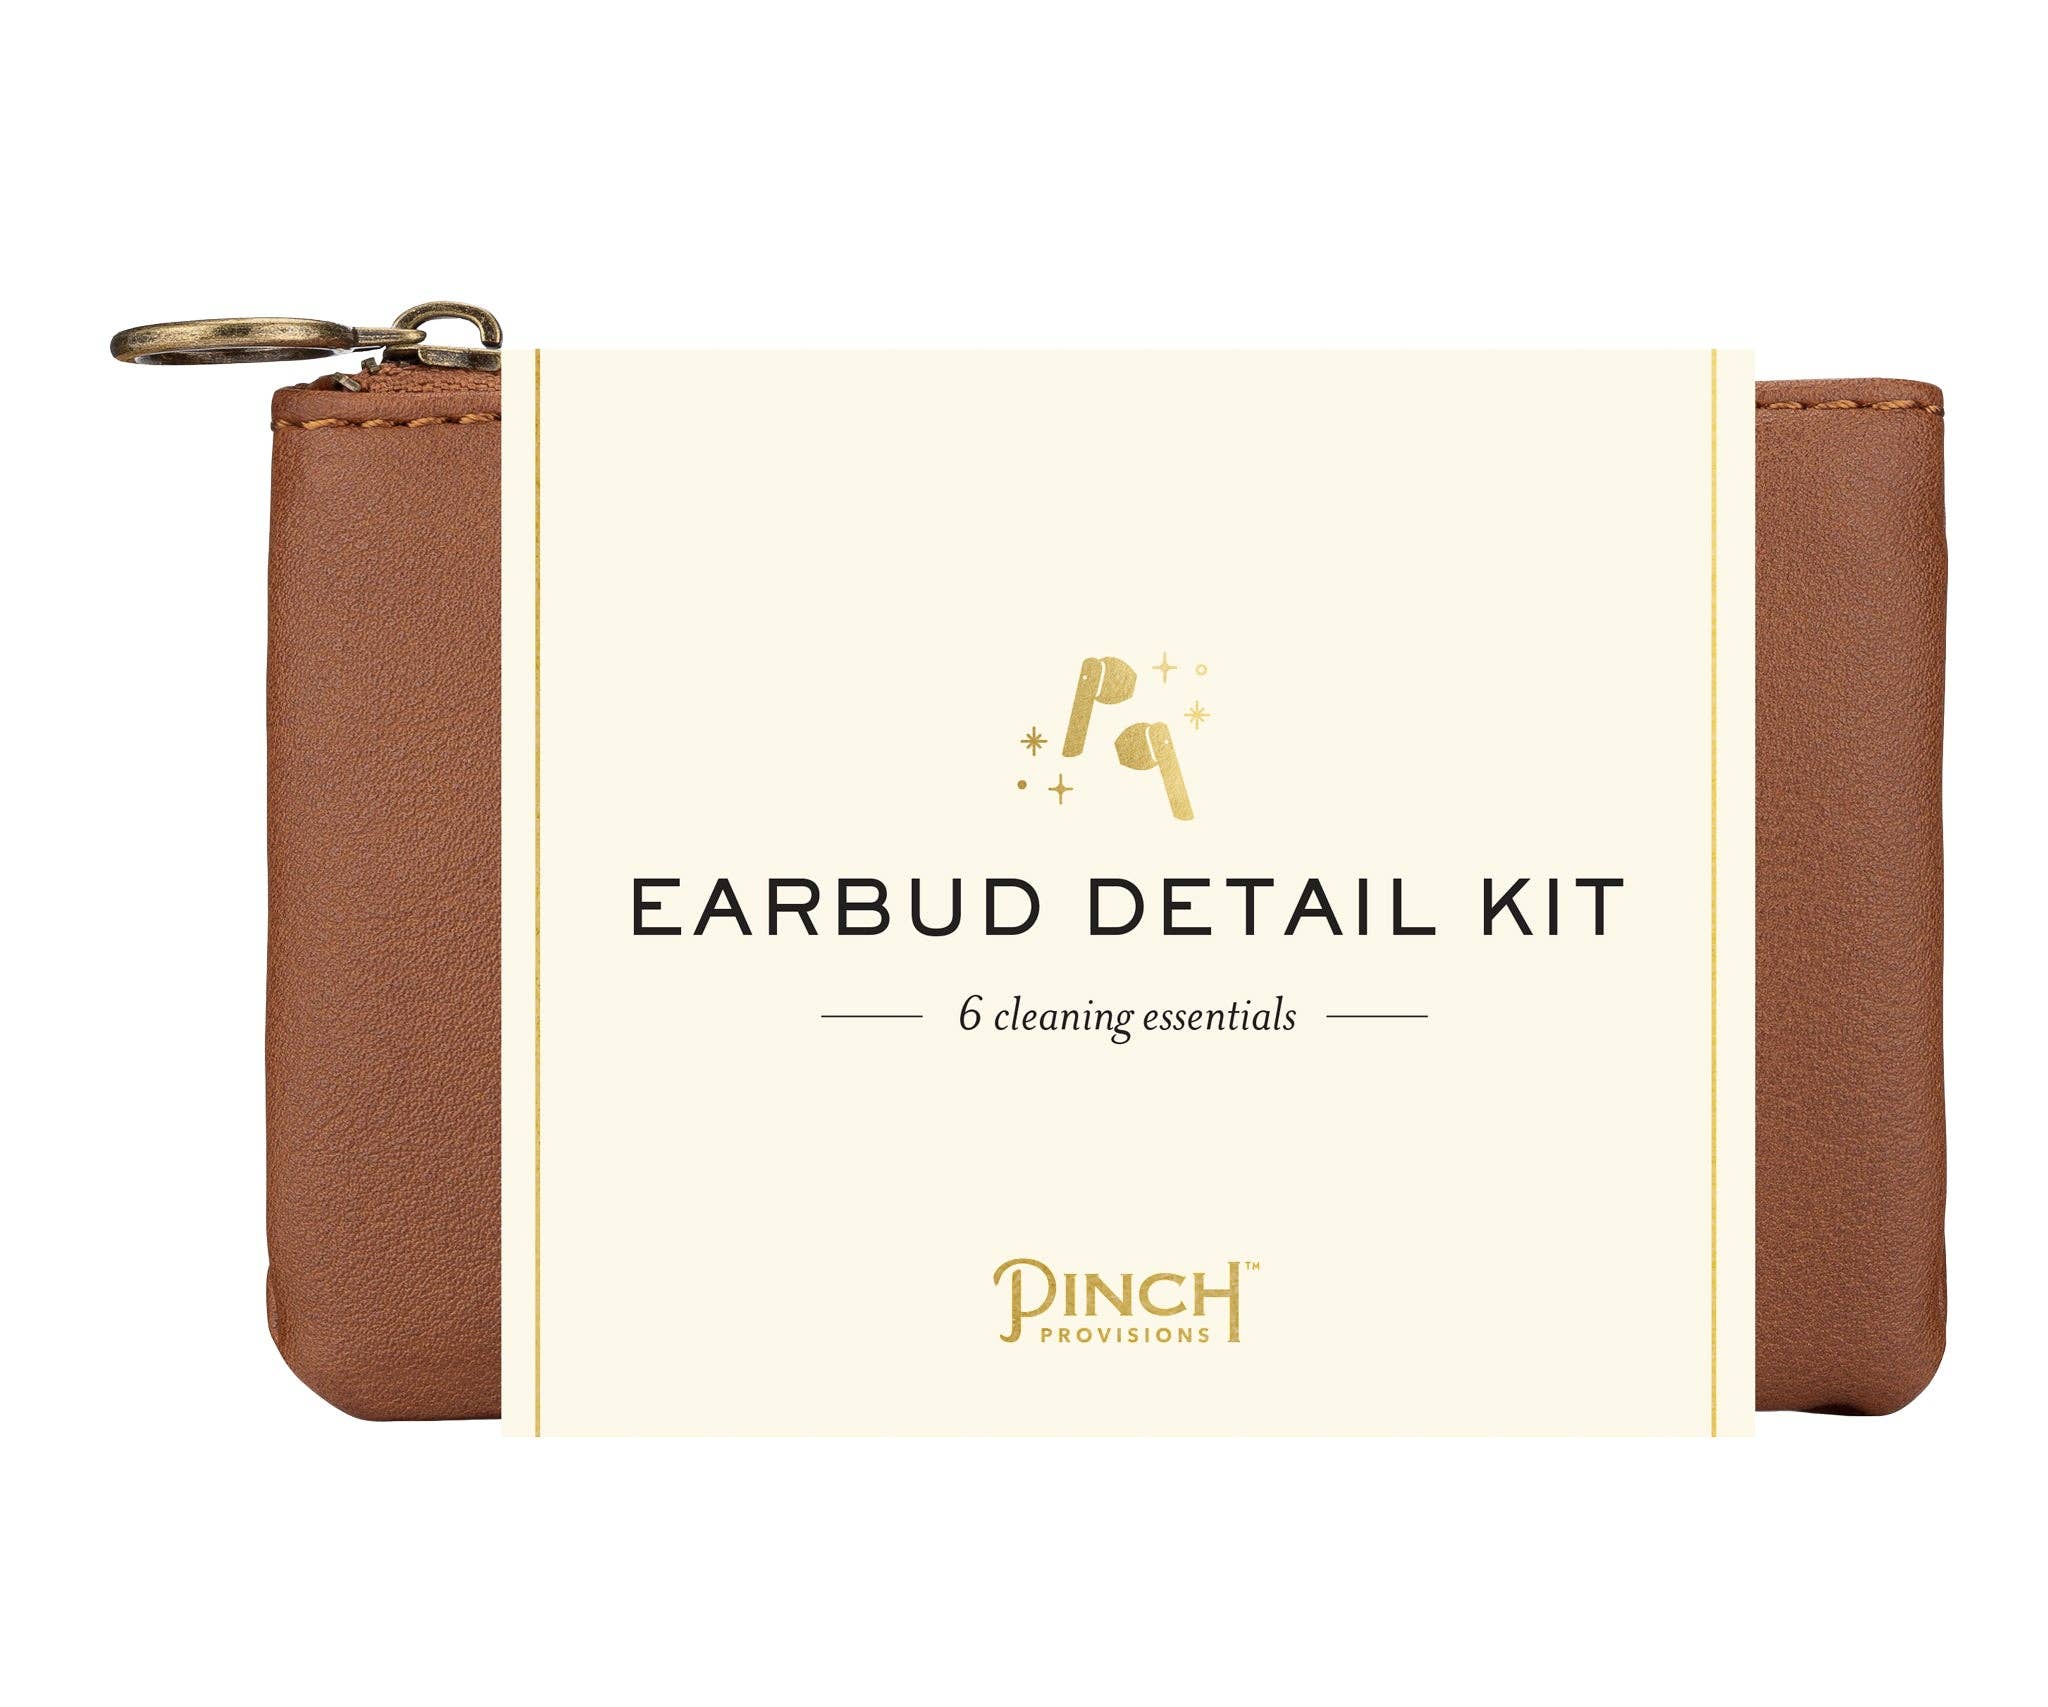 Pinch Provisions - Earbud Detail Kit